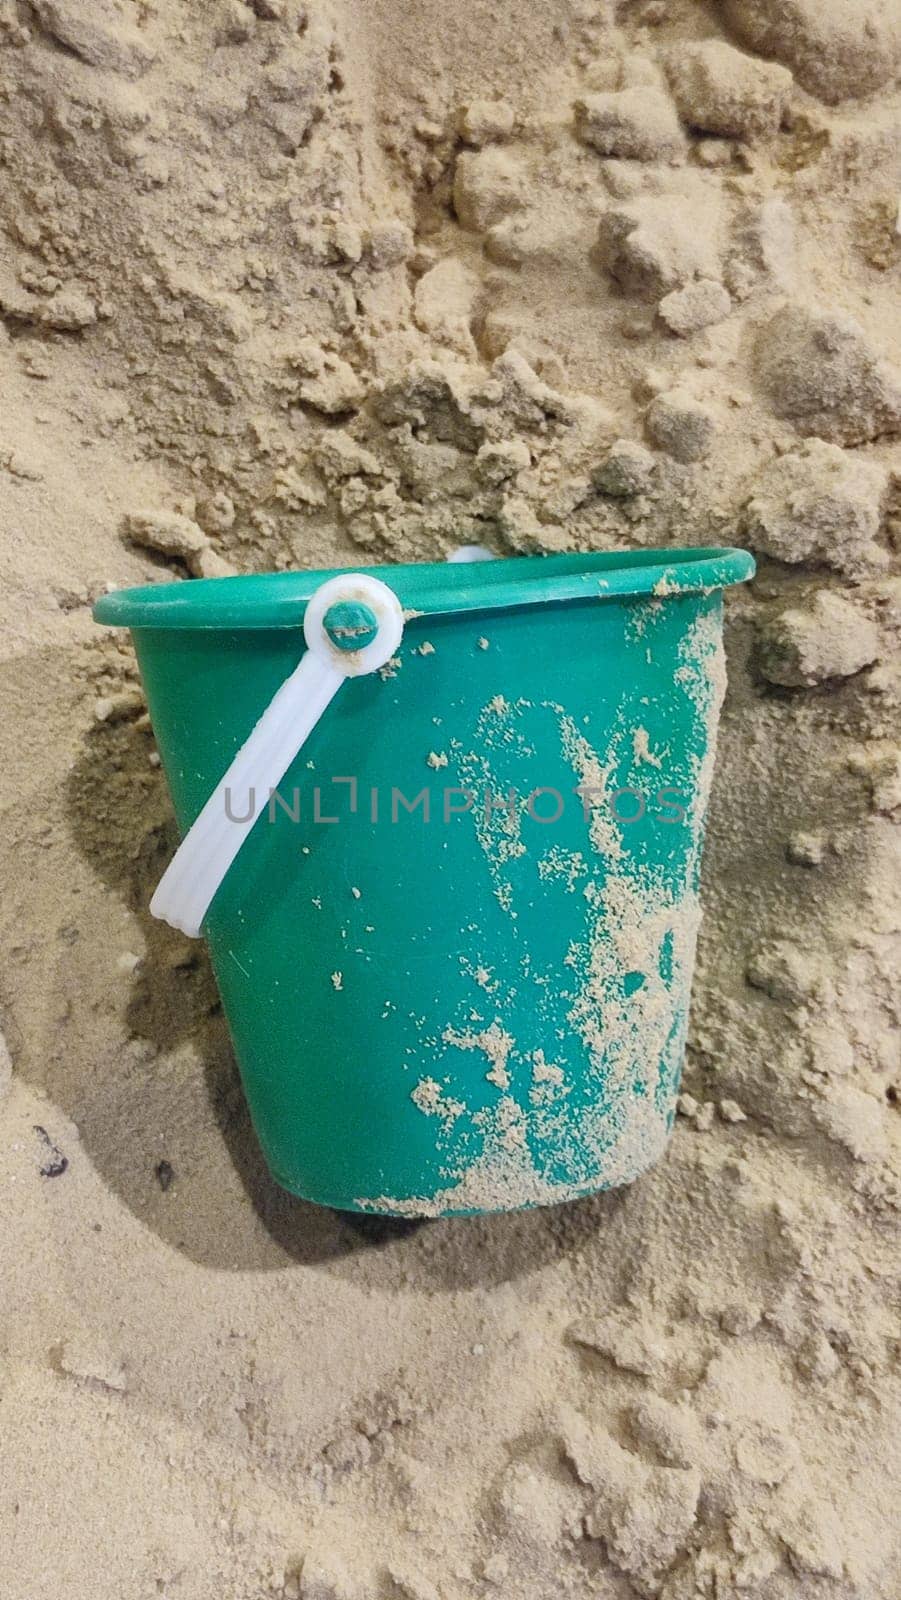 green plastic bucket lies in the sand, children's toy, object, beach by Ply